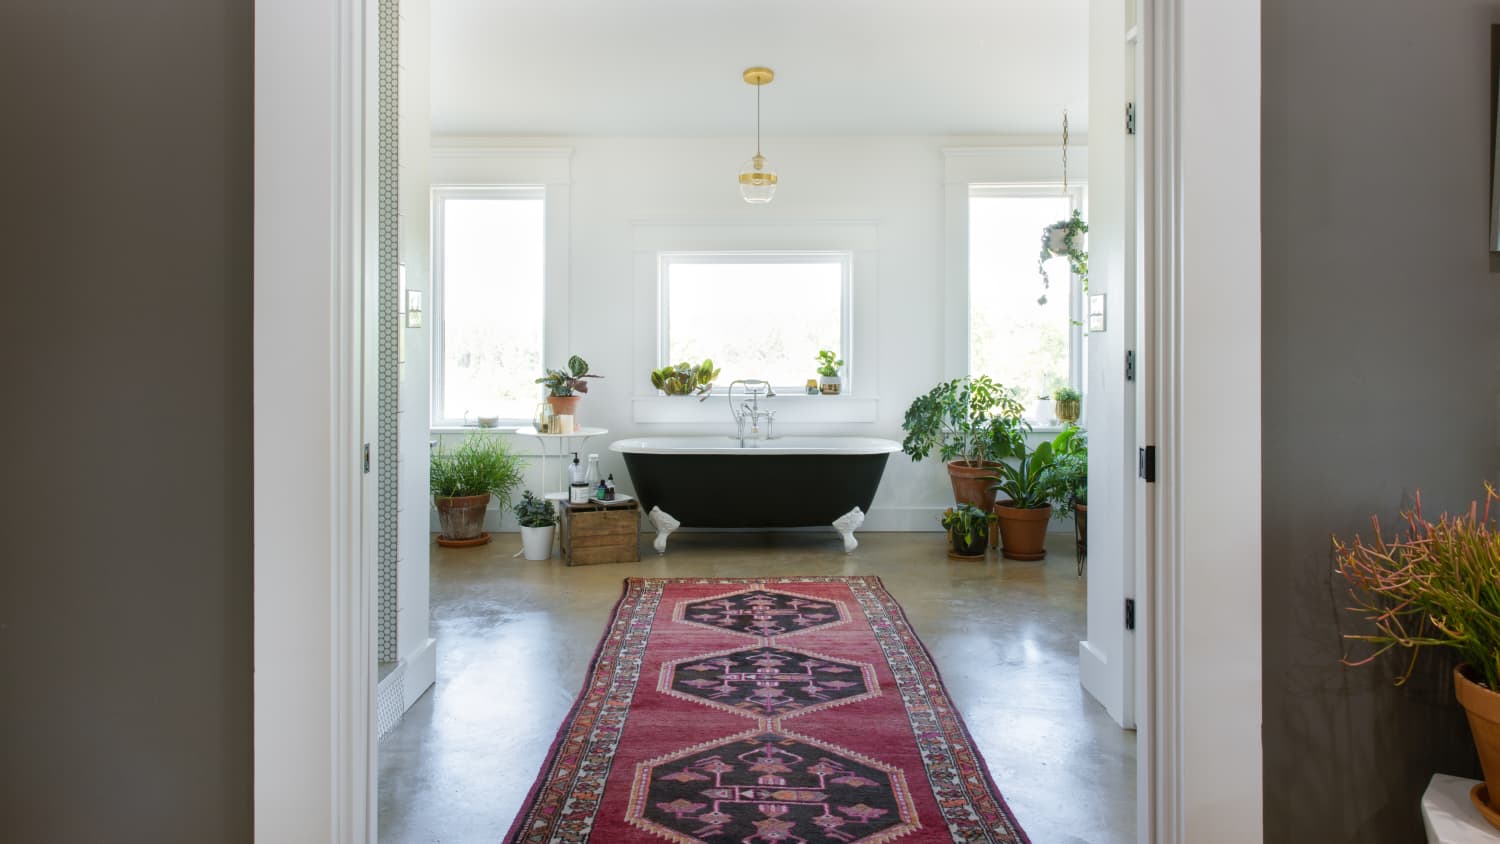 43 small bathroom ideas from the House & Garden archive